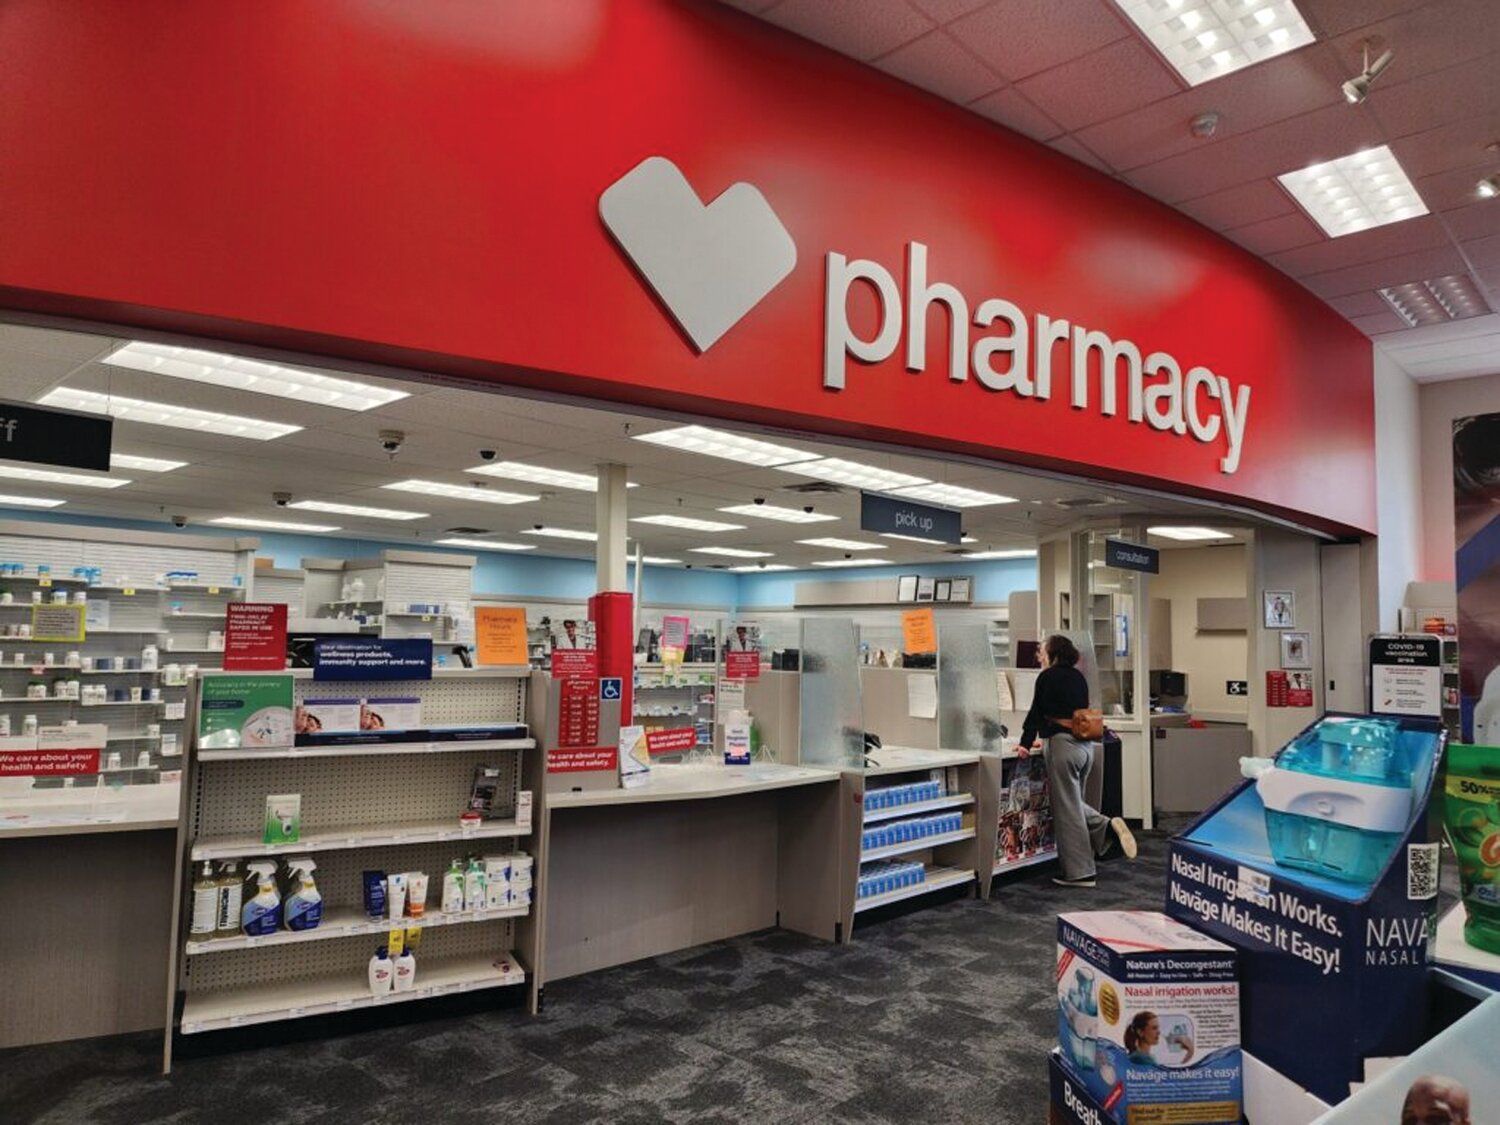 LAYOFFS: CVS Health Corp. will lay off 500 jobs in Rhode Island as part of nationwide cuts. (Photo by Lynne Terry/Oregon Capital Chronicle, States Newsroom.)